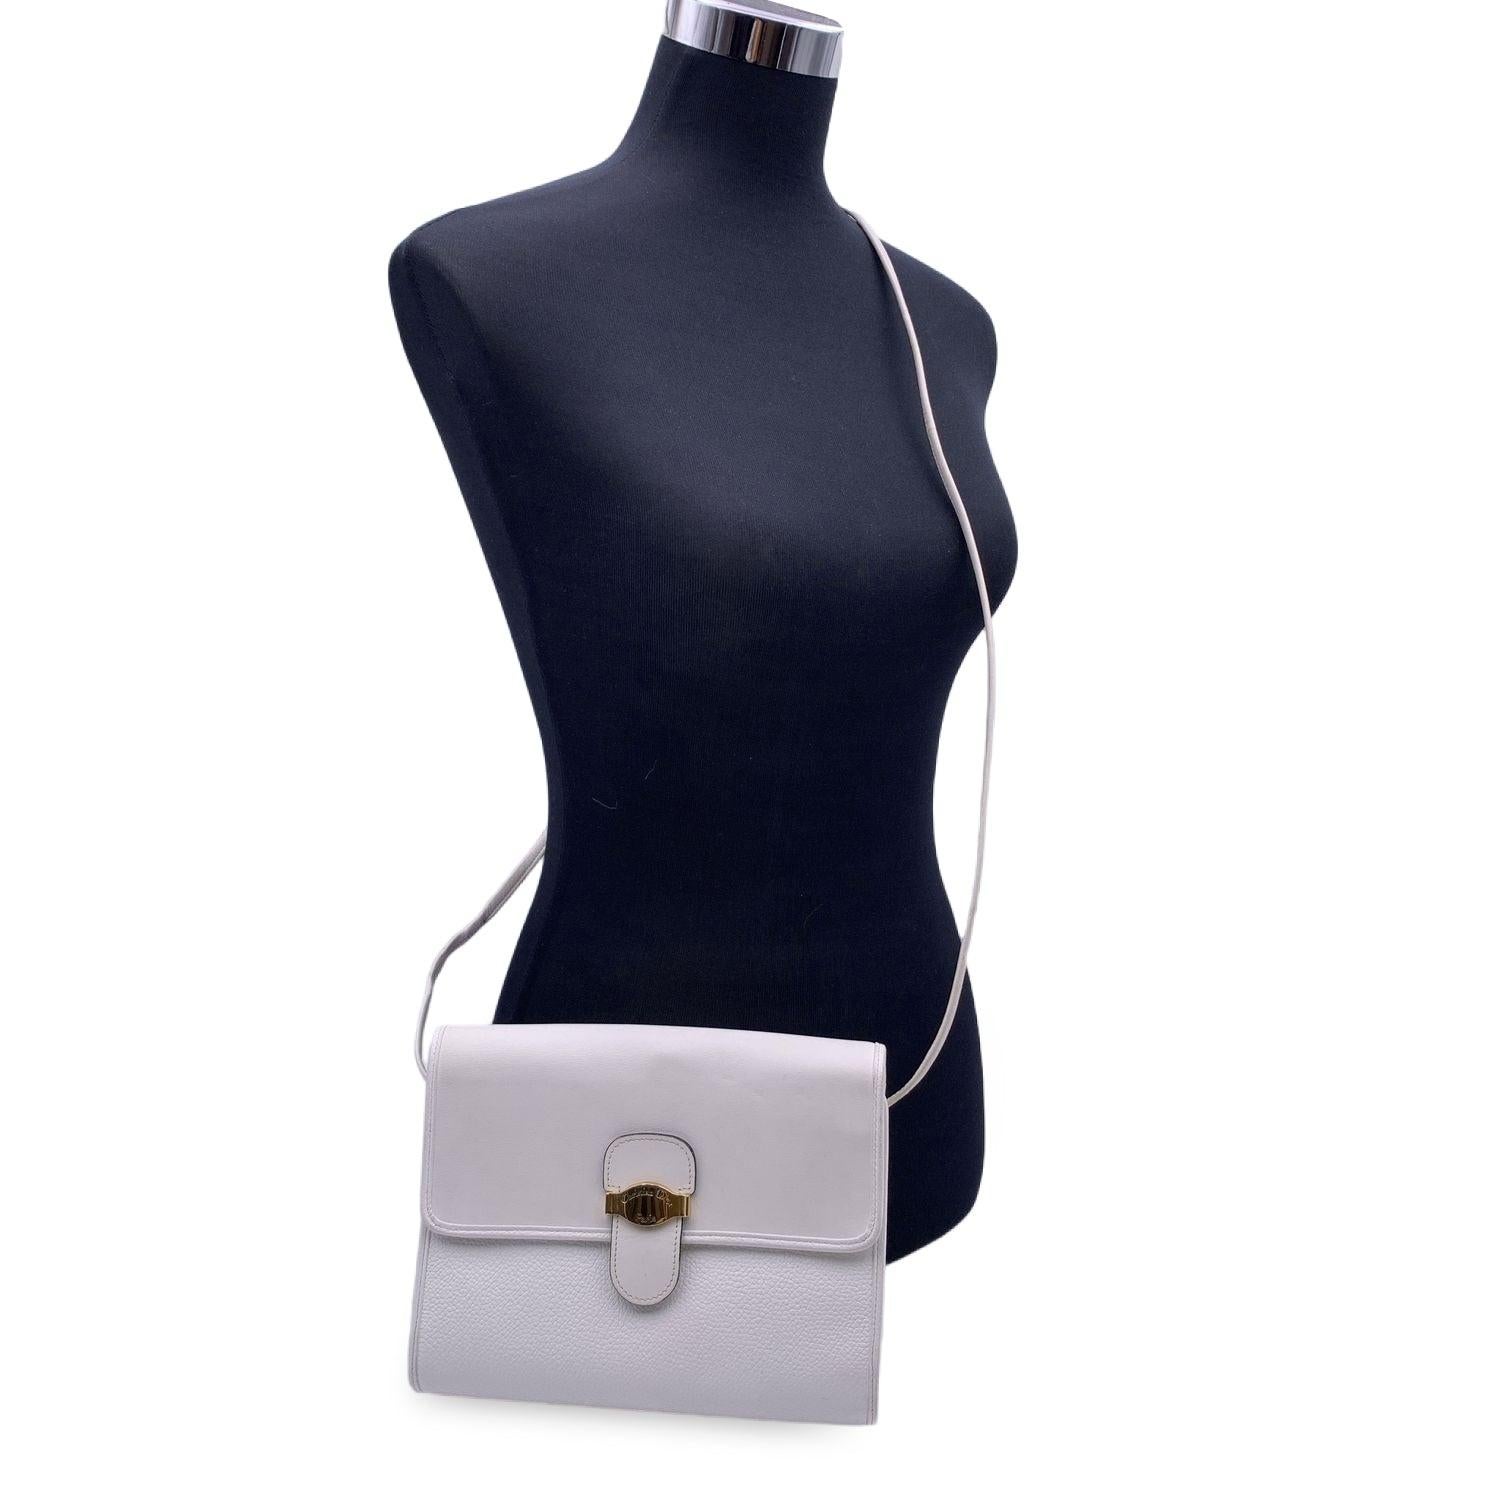 Vintage CHRISTIAN DIOR shoulder bag crafted in white leather. Flap with magnetic button closure. Gold metal 'Christian Dior Paris' logo tab on the front. 1 side open pocket inside. 'Christian Dior - Made in France' tag inside

Condition

A -